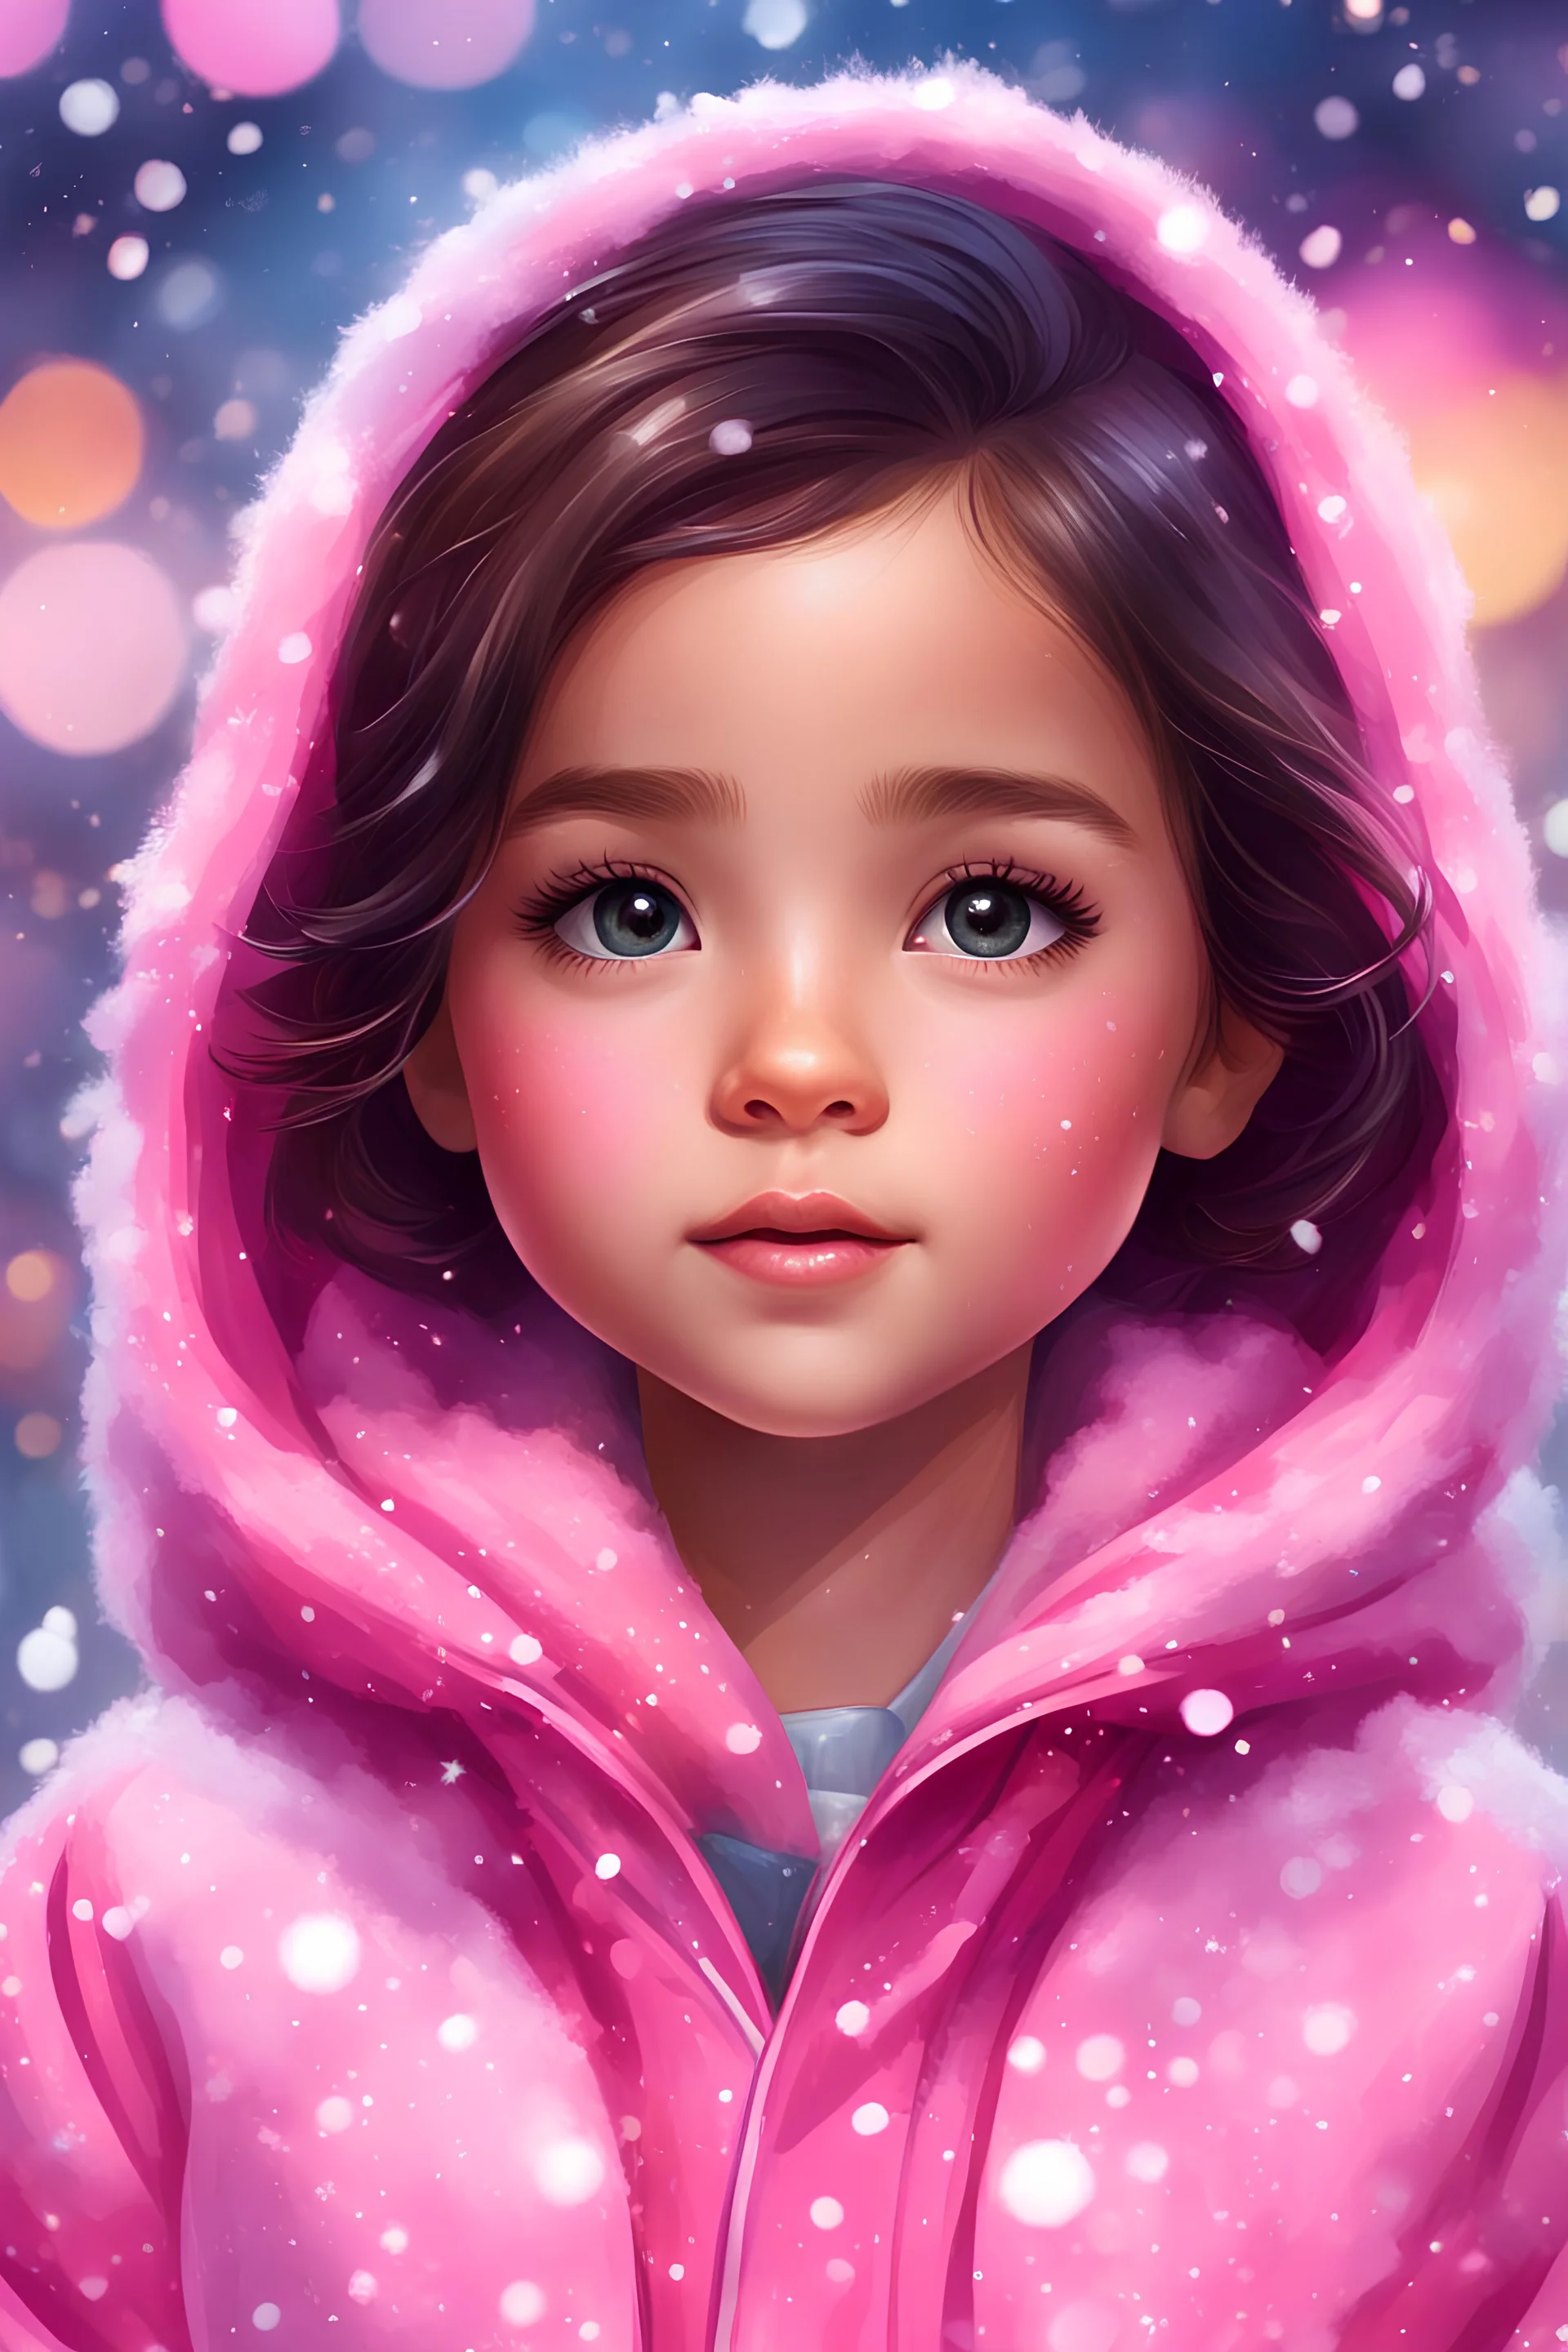 Cute Little Girl Drawing Wallpapers - Wallpaper Cave